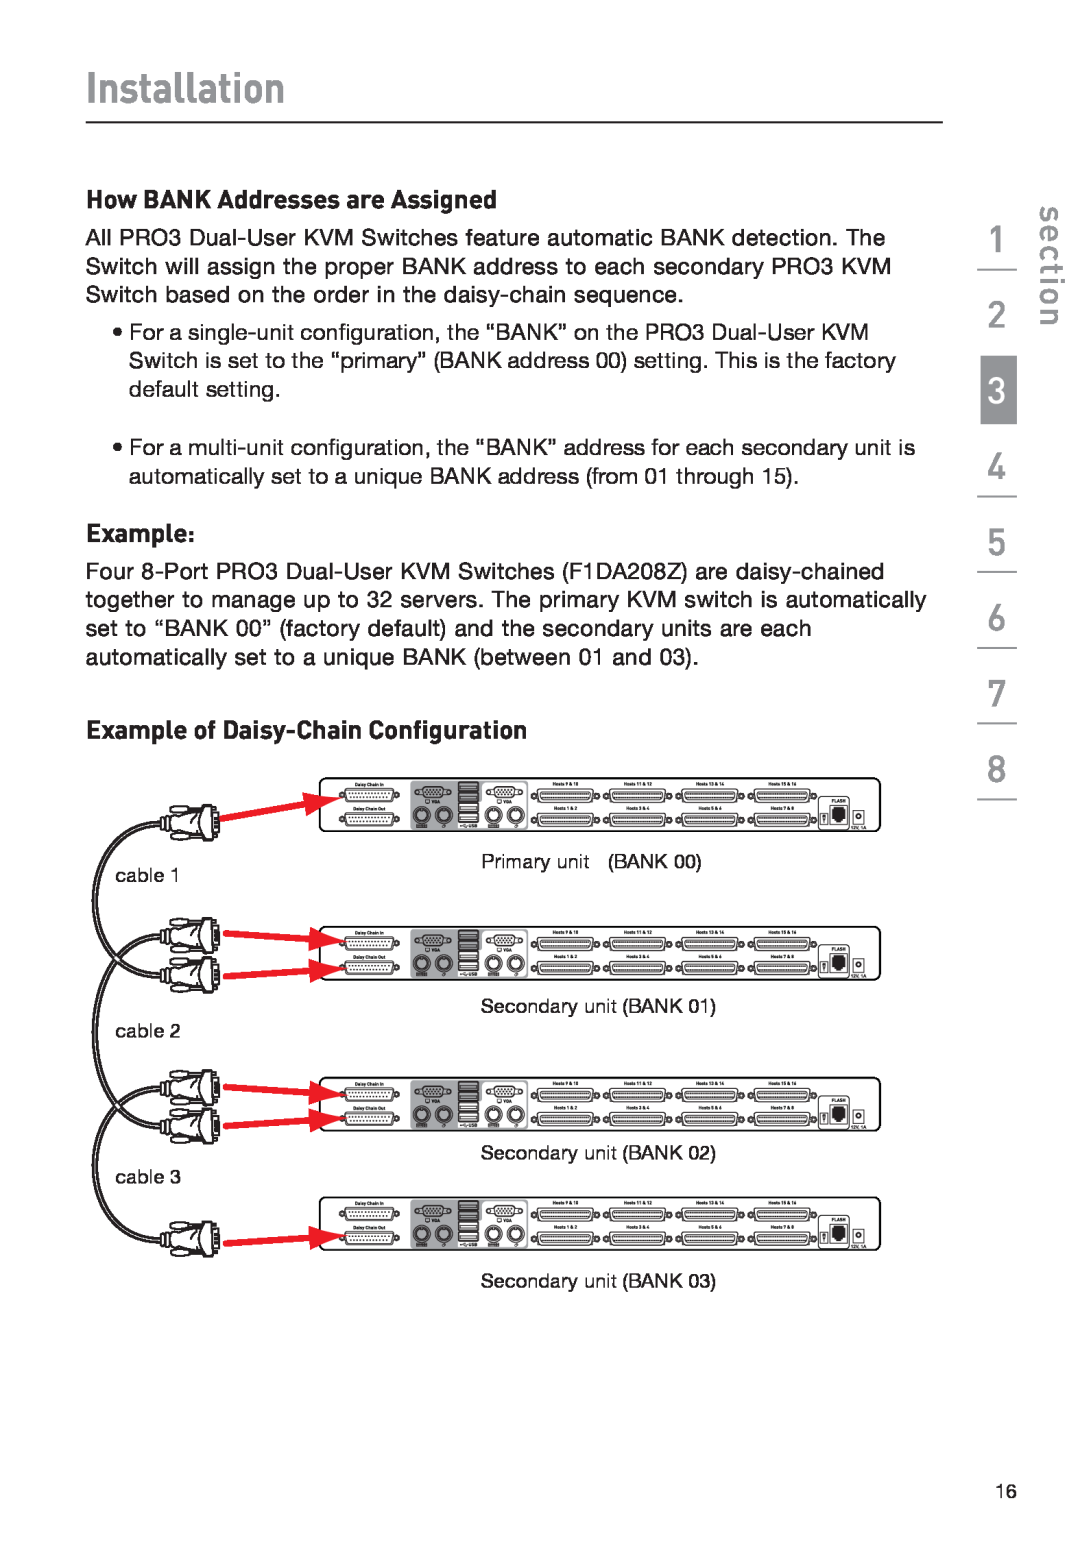 Belkin F1DA208Z manual How BANK Addresses are Assigned, Example of Daisy-Chain Configuration, Installation, section 